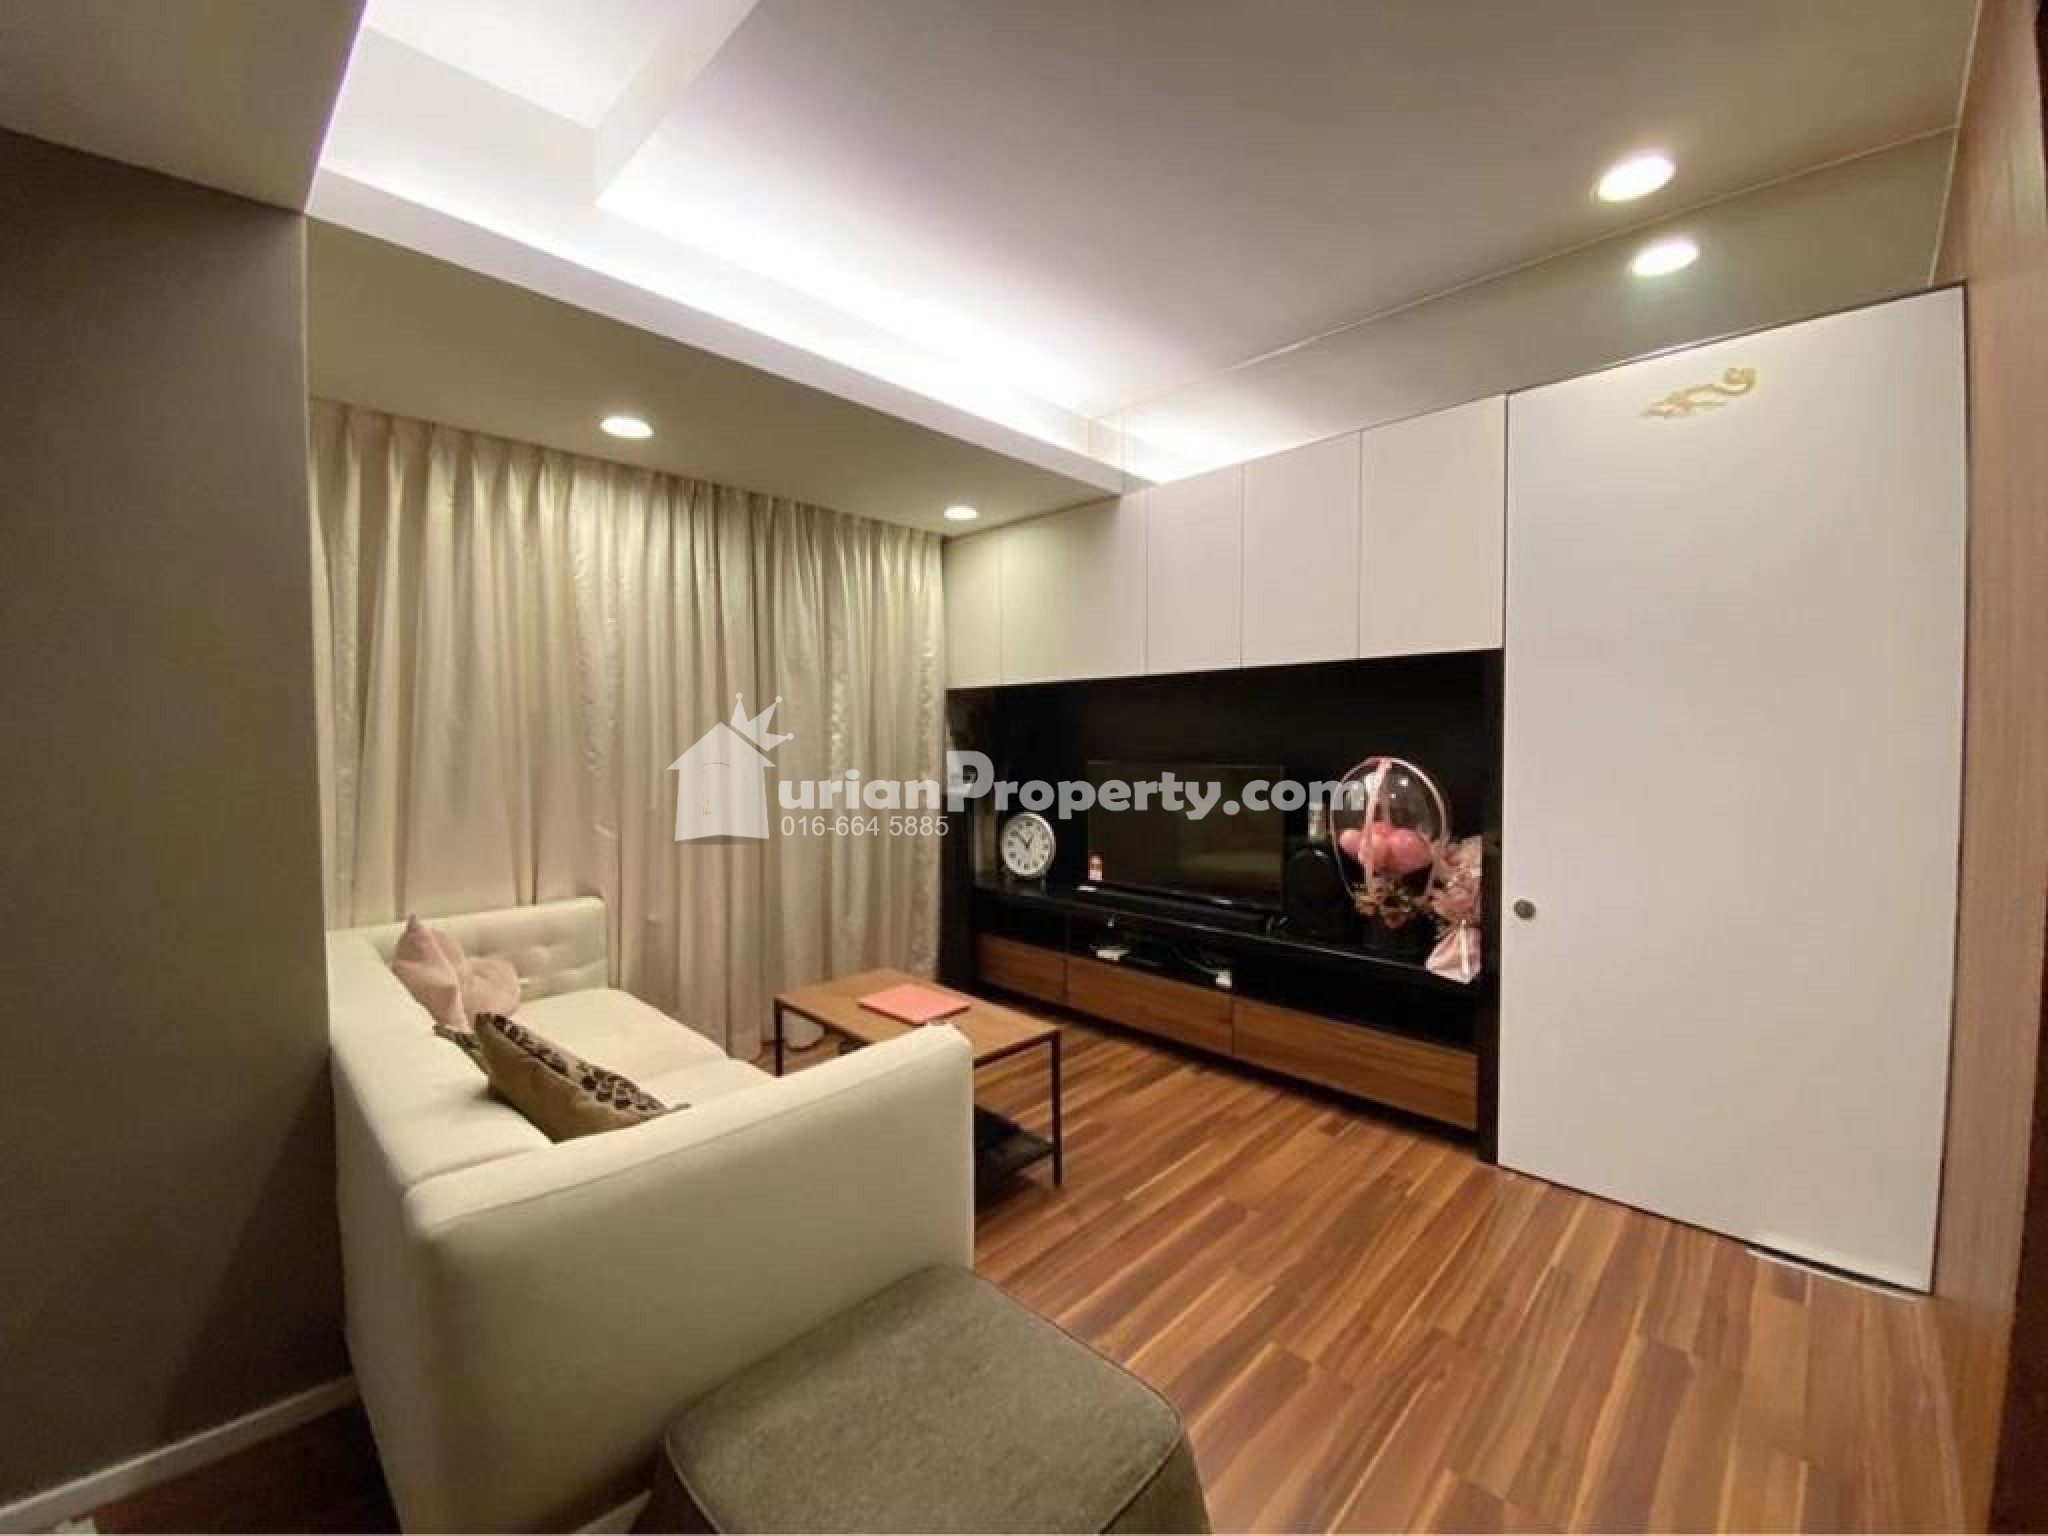 Condo For Rent at Verve Suites